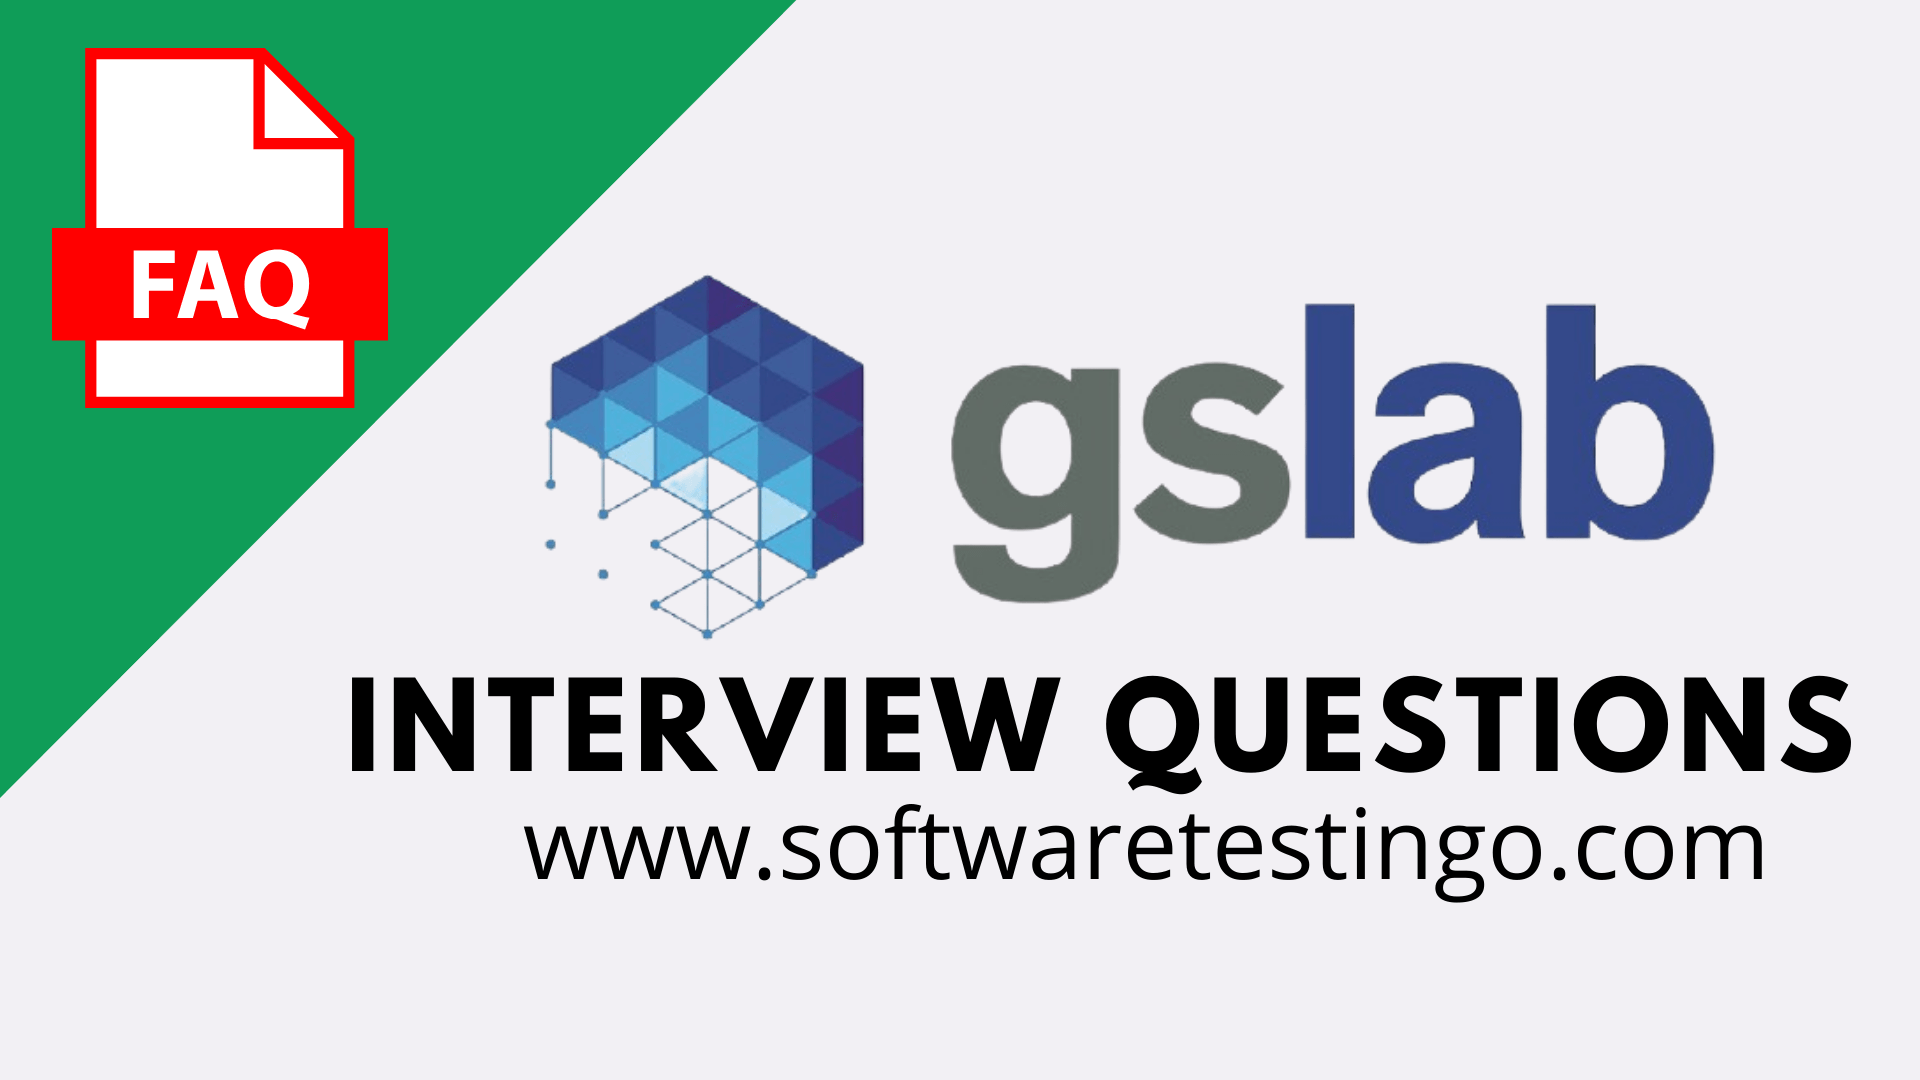 GS Lab Interview Questions